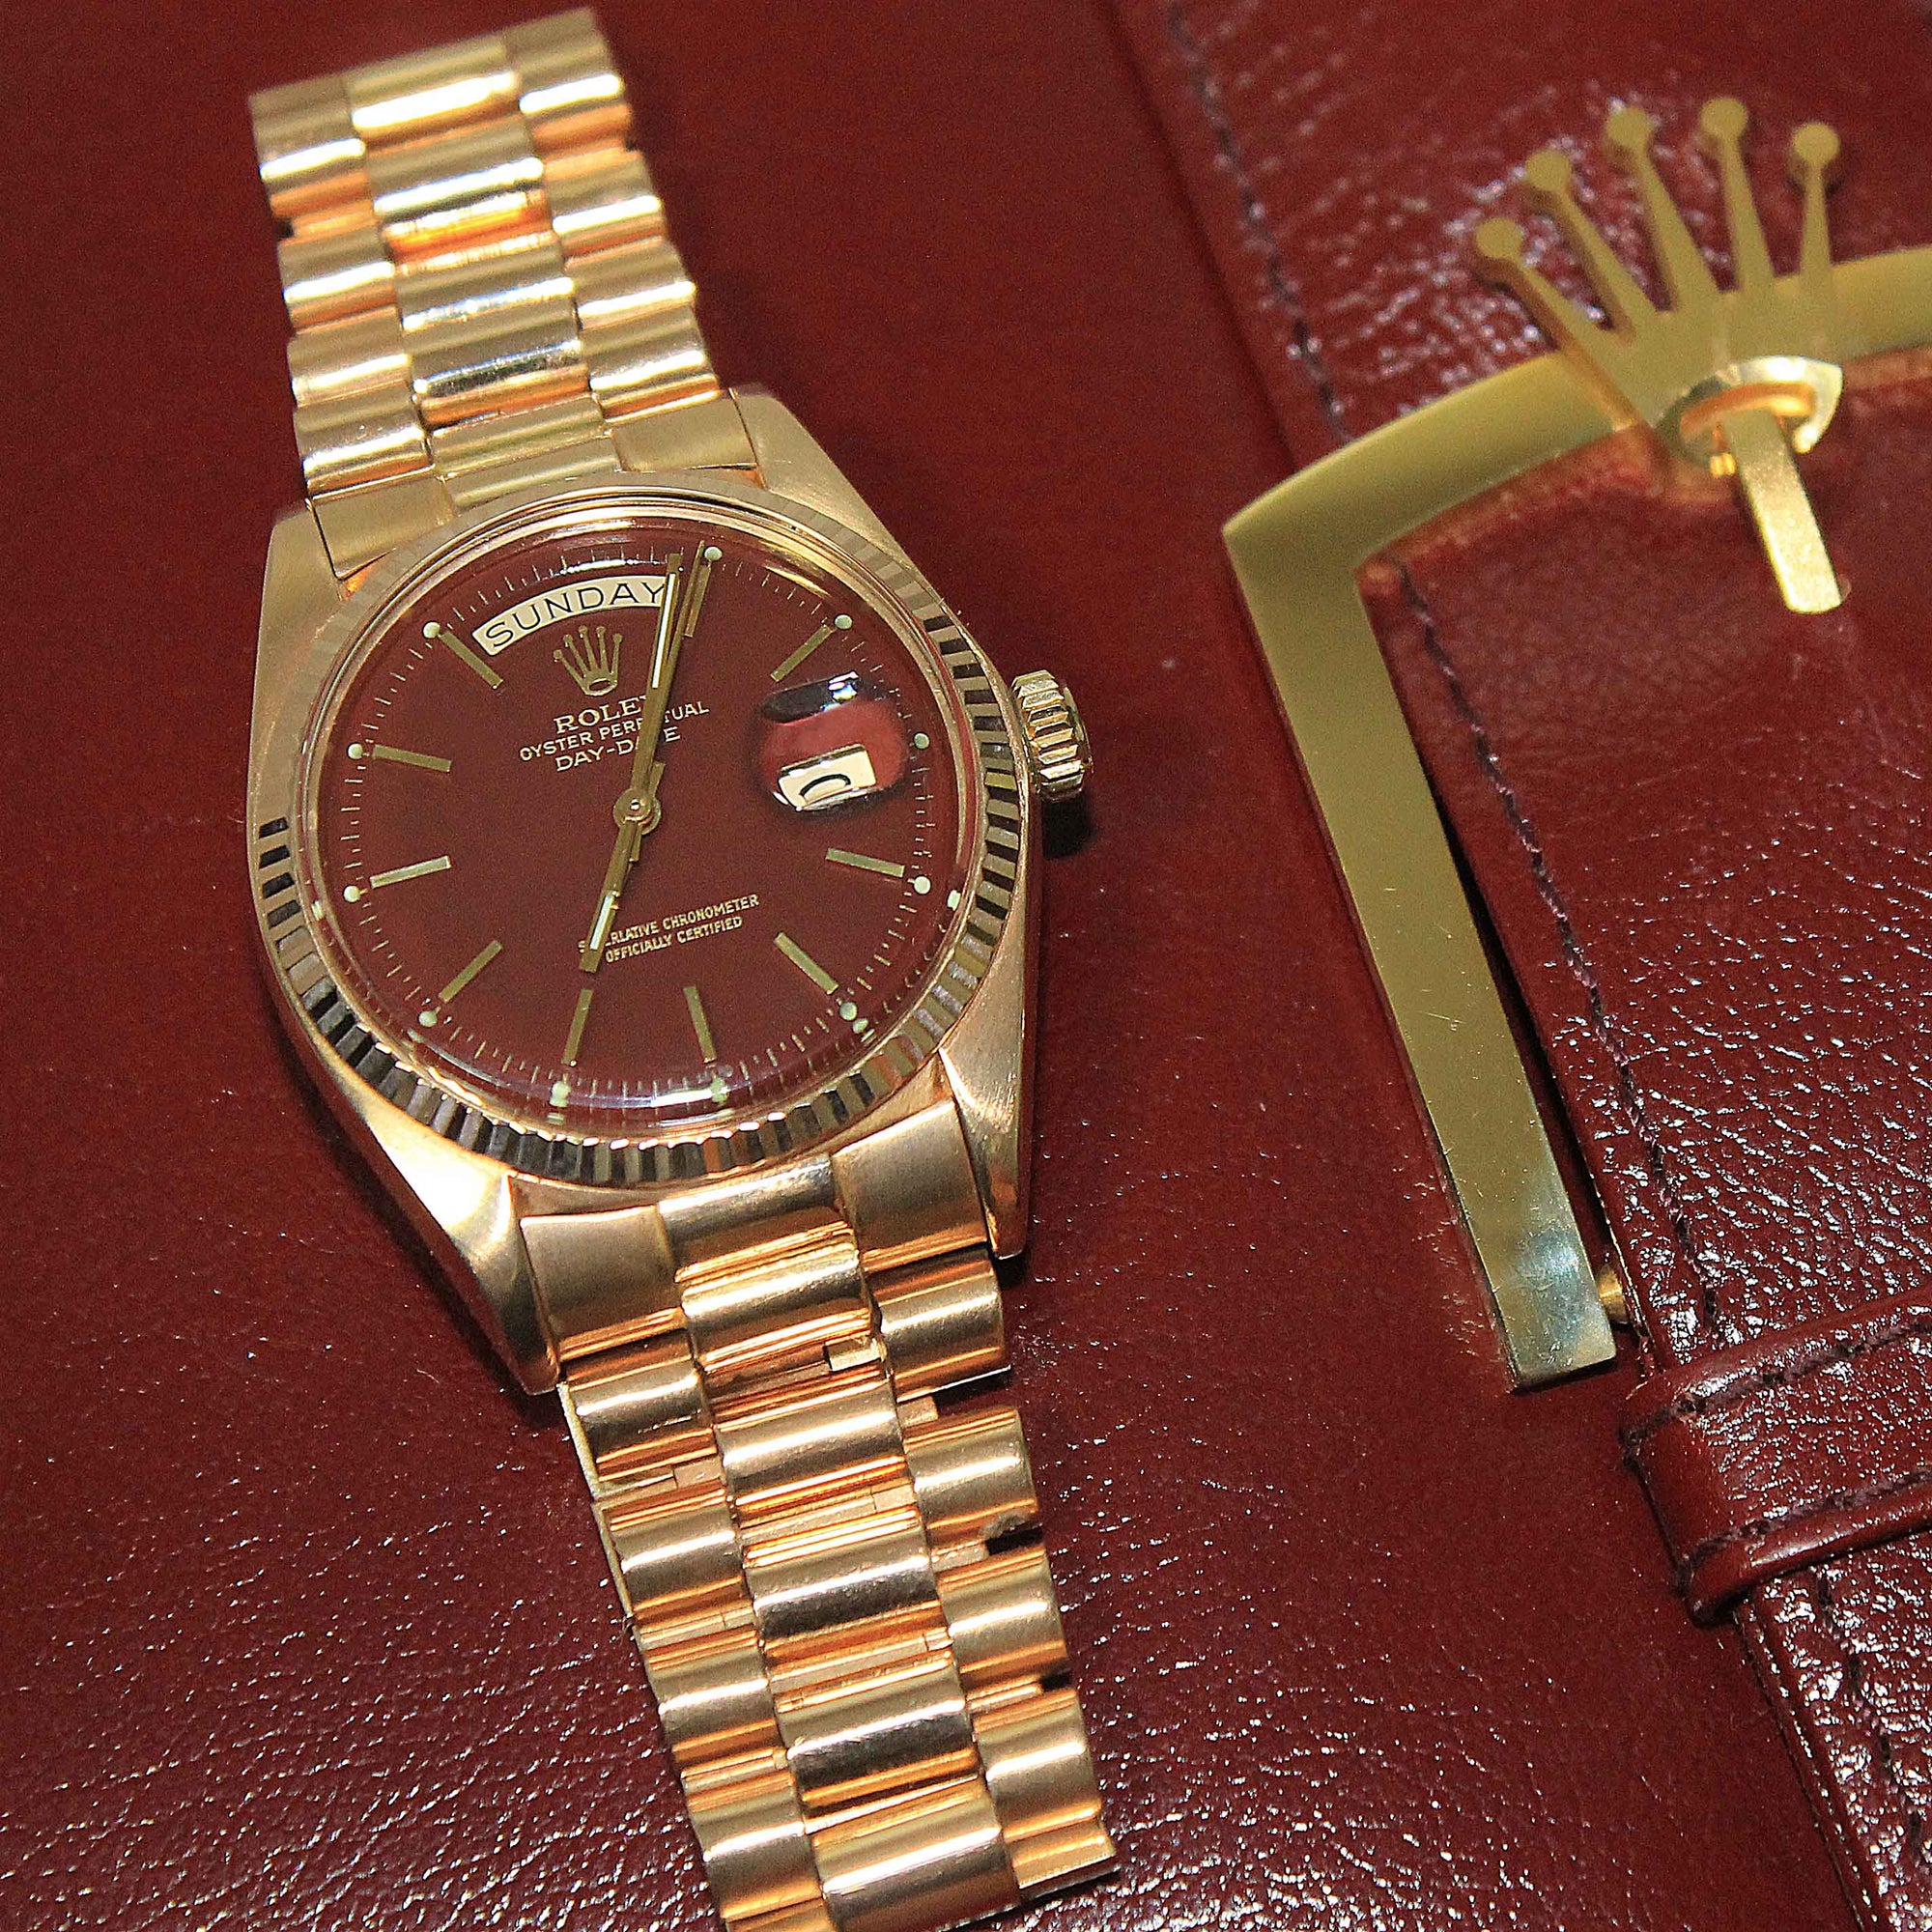 The Most Treasured Heirloom Watches